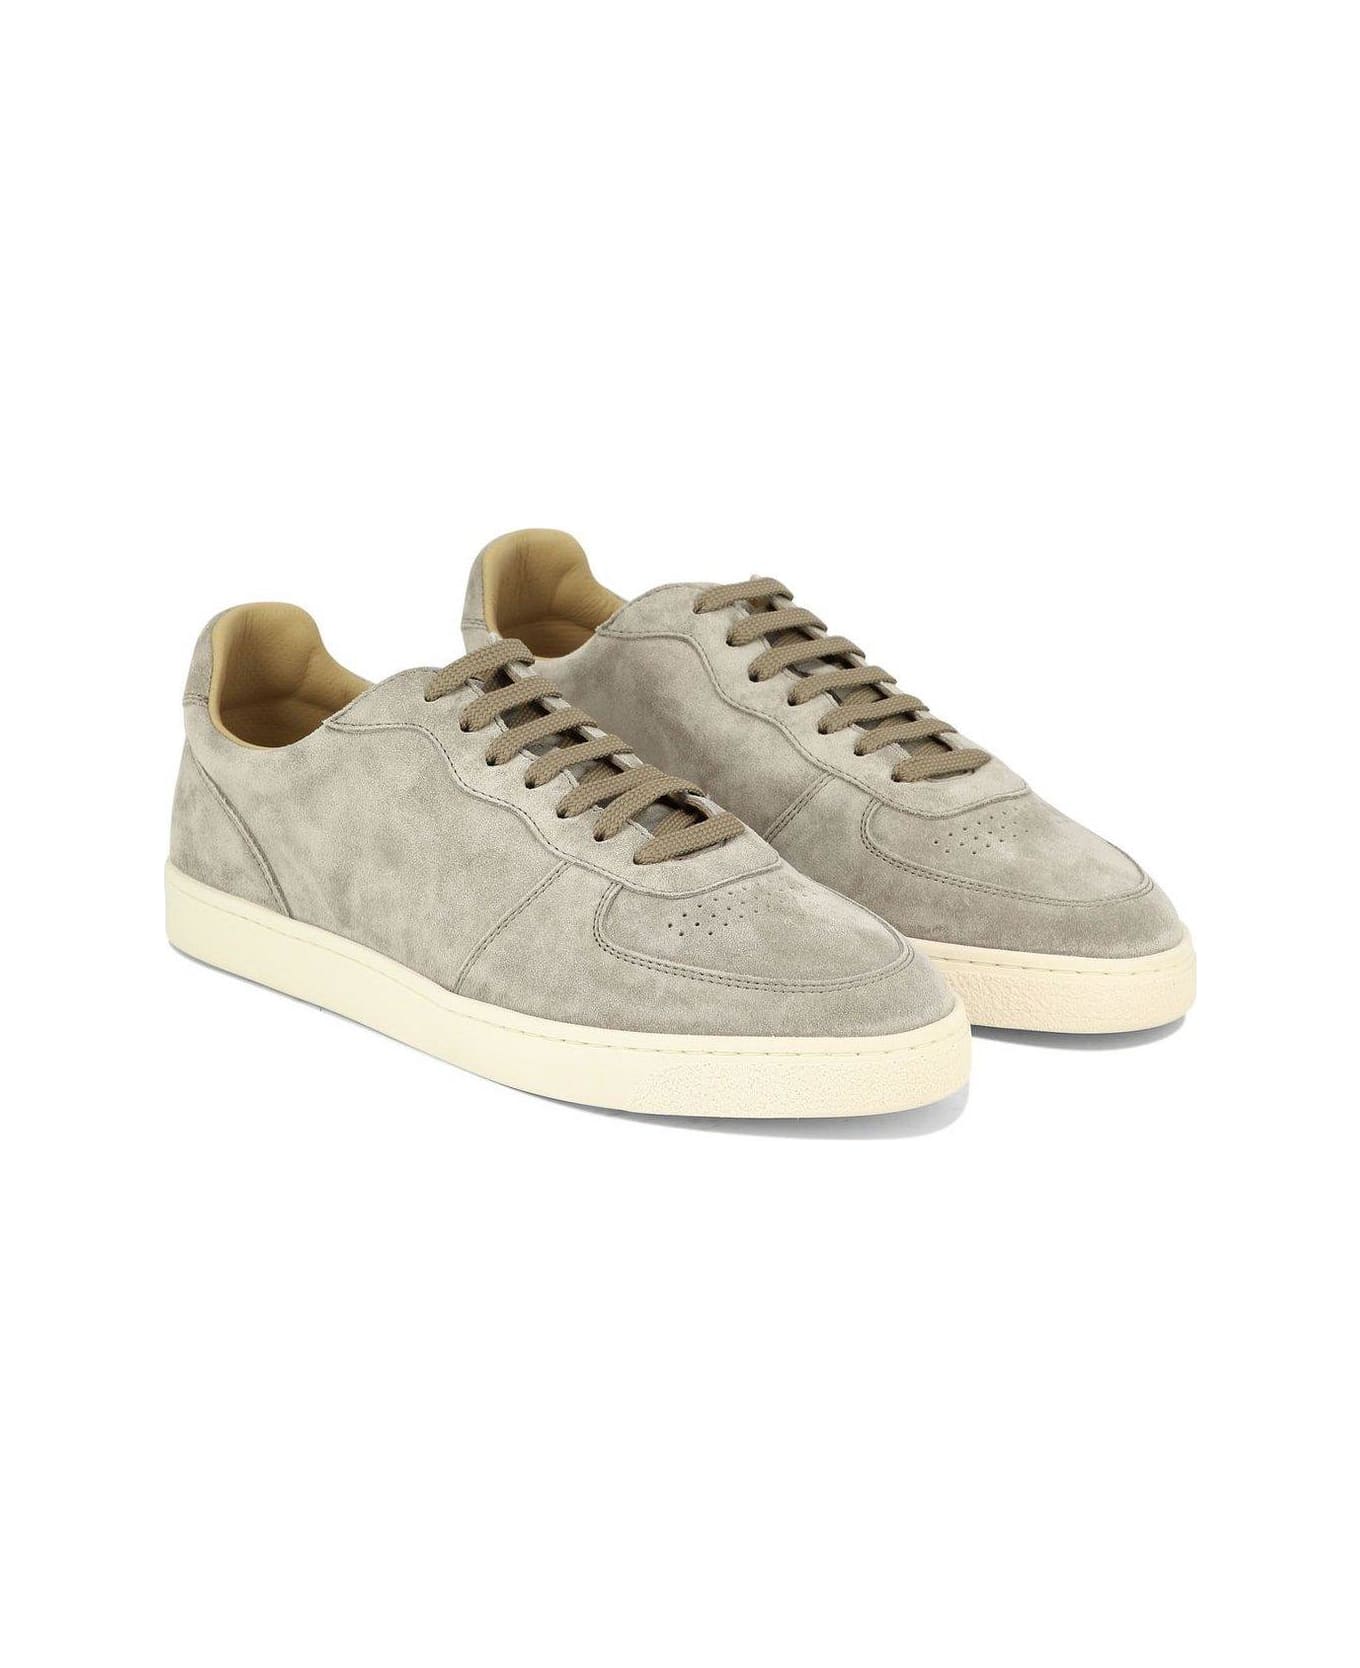 Brunello Cucinelli Round-toe Lace-up Sneakers - Beige